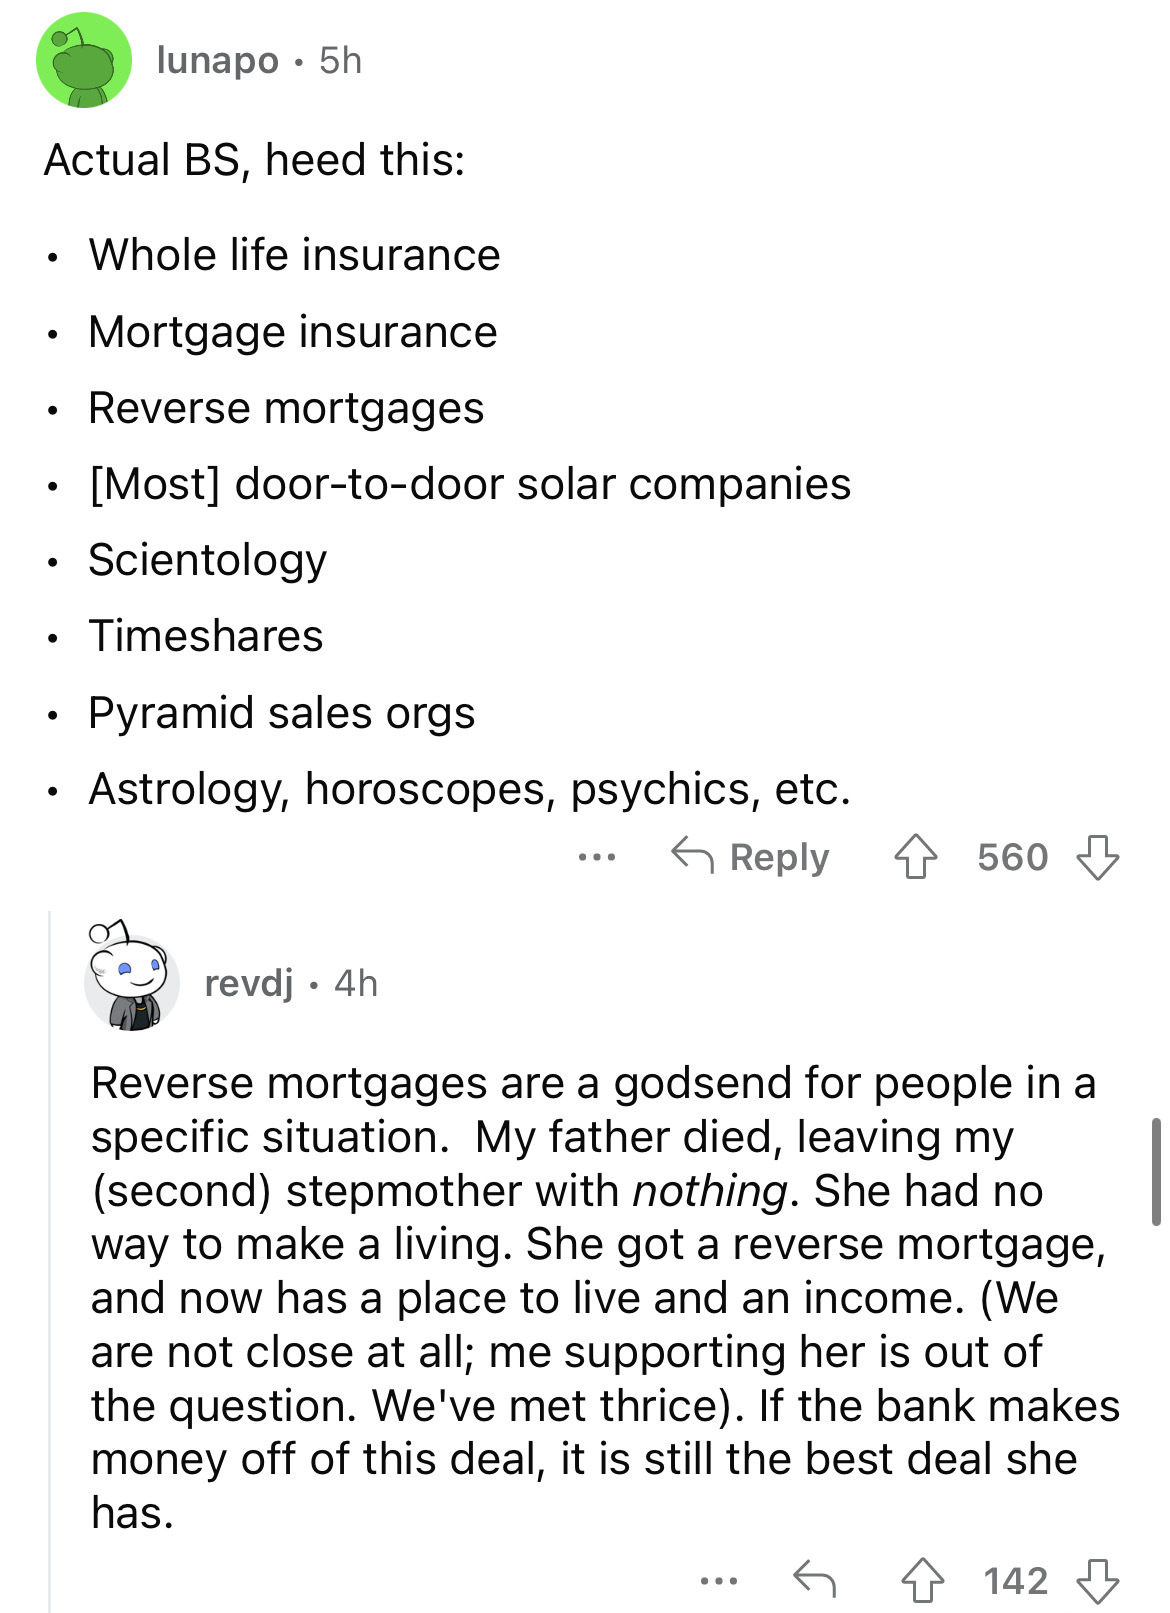 document - lunapo 5h Actual Bs, heed this Whole life insurance Mortgage insurance Reverse mortgages Most doortodoor solar companies Scientology Time Pyramid sales orgs Astrology, horoscopes, psychics, etc. revdj 4h ... 560 Reverse mortgages are a godsend 